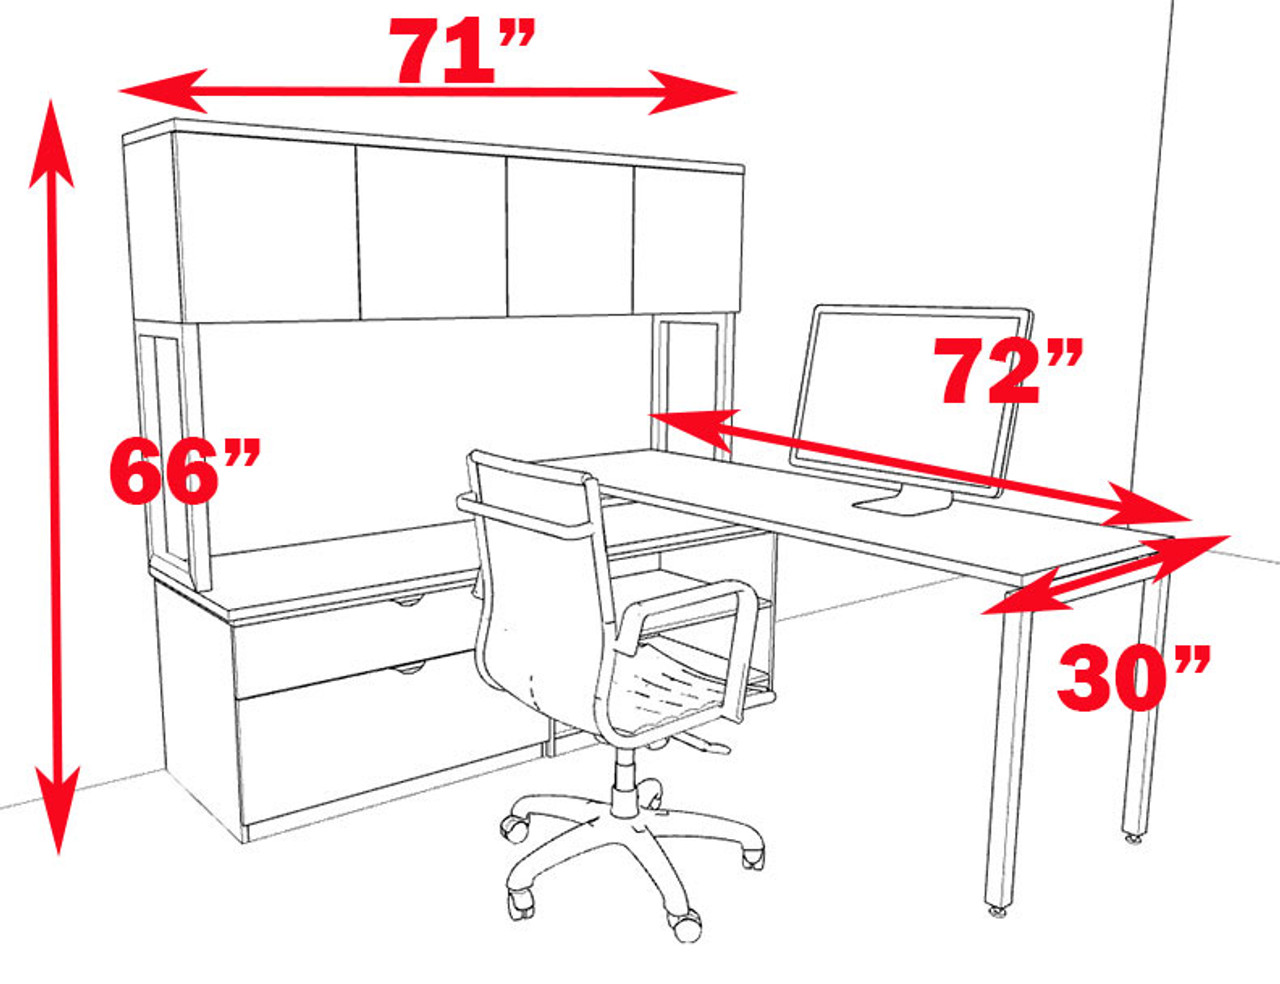 3pc L Shaped Modern Contemporary Executive Office Desk Set, #OF-CON-L45